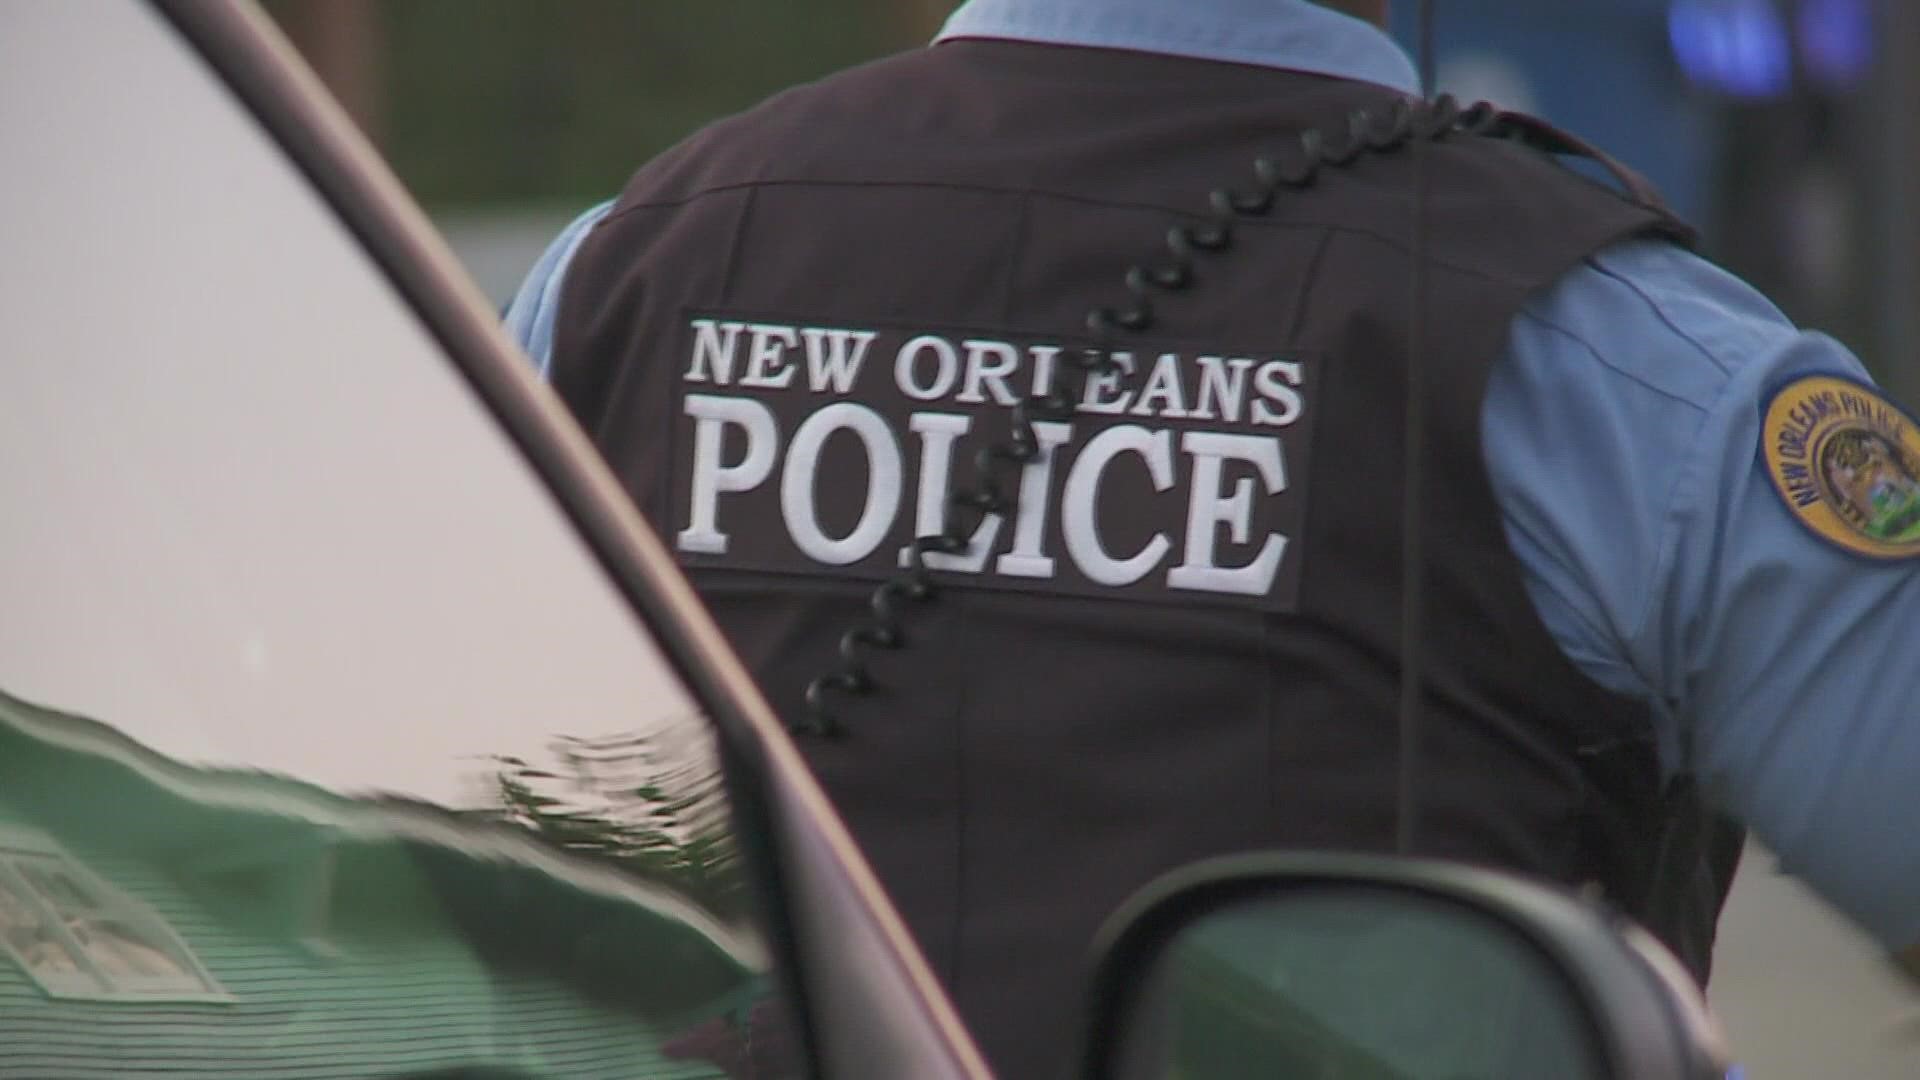 New Orleans Police Chief Shaun Ferguson said the focus for the department needs to be on attracting more manpower.